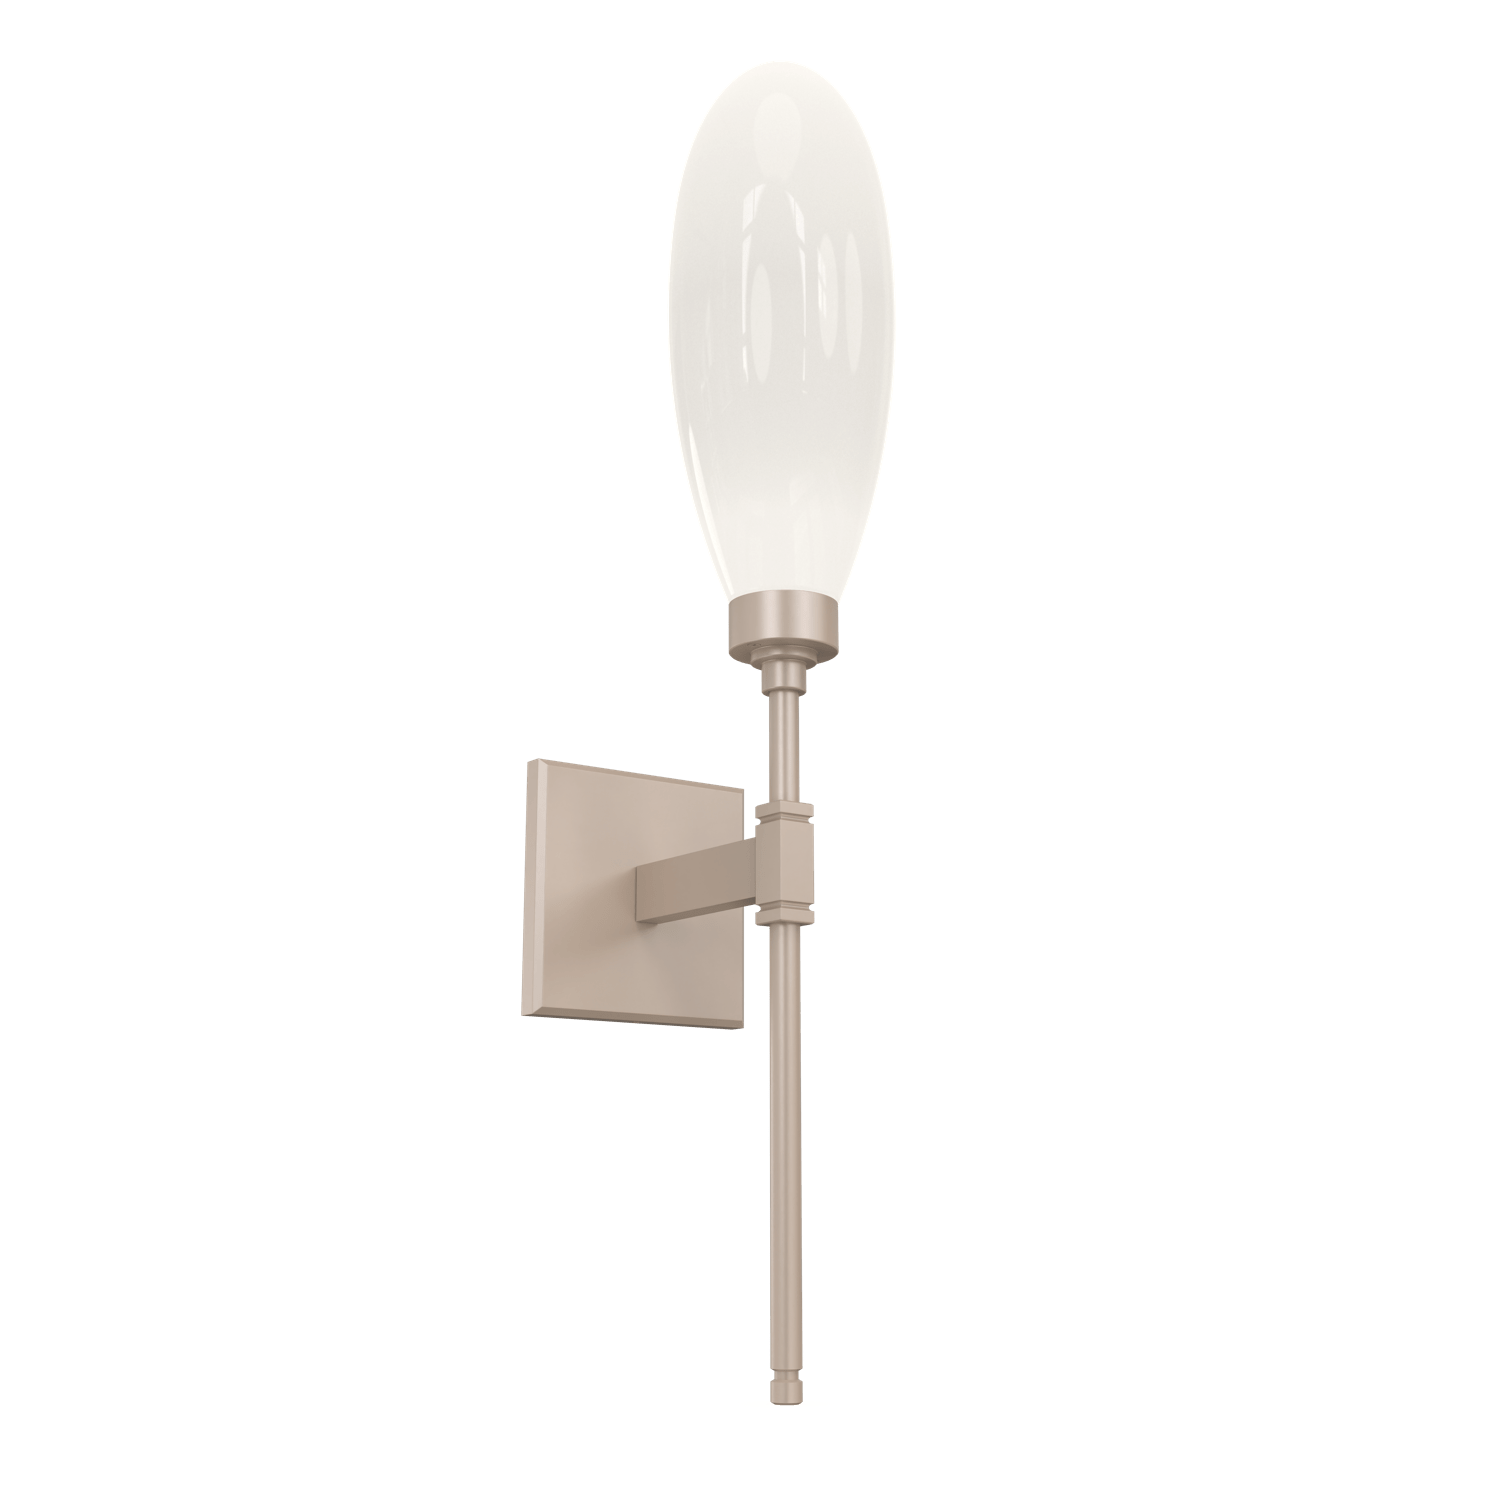 IDB0071-21-BS-WL-LL-Hammerton-Studio-Fiori-wall-sconce-with-metallic-beige-silver-finish-and-opal-white-glass-shades-and-LED-lamping